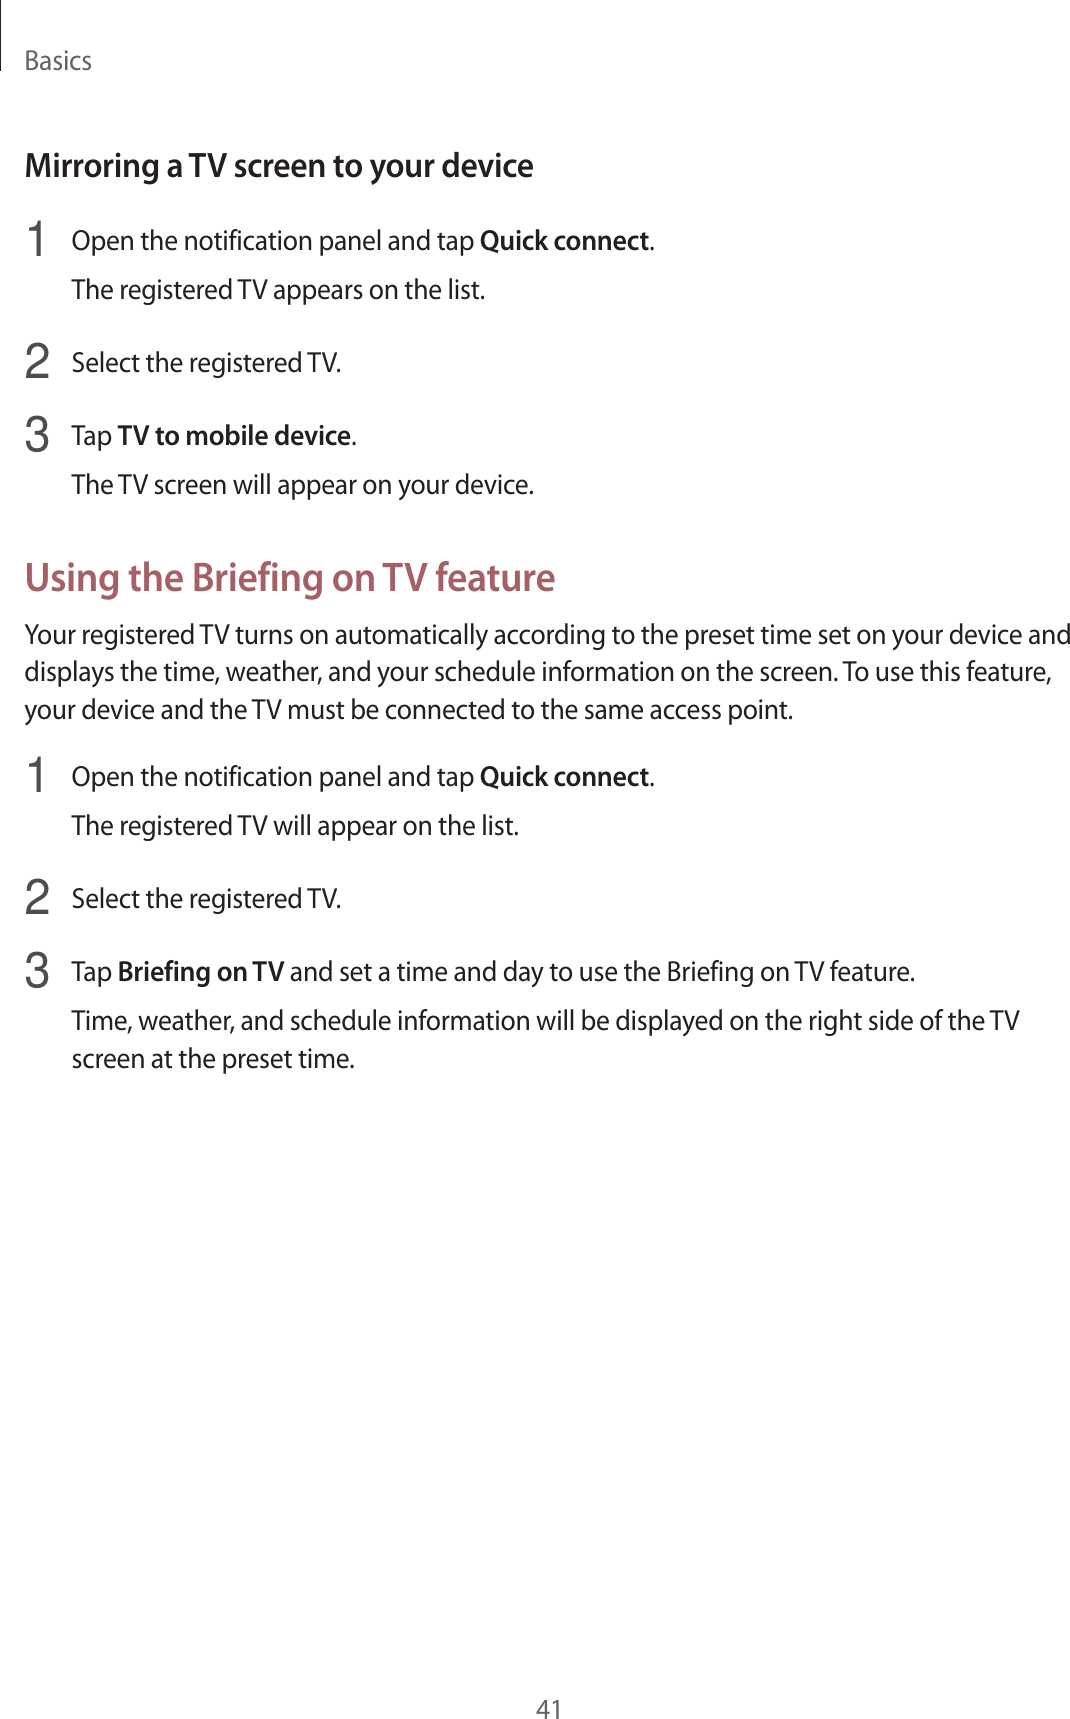 Basics41Mirroring a TV screen to your device1  Open the notification panel and tap Quick connect.The registered TV appears on the list.2  Select the registered TV.3  Tap TV to mobile device.The TV screen will appear on your device.Using the Briefing on TV featureYour registered TV turns on automatically according to the preset time set on your device and displays the time, weather, and your schedule information on the screen. To use this feature, your device and the TV must be connected to the same access point.1  Open the notification panel and tap Quick connect.The registered TV will appear on the list.2  Select the registered TV.3  Tap Briefing on TV and set a time and day to use the Briefing on TV feature.Time, weather, and schedule information will be displayed on the right side of the TV screen at the preset time.